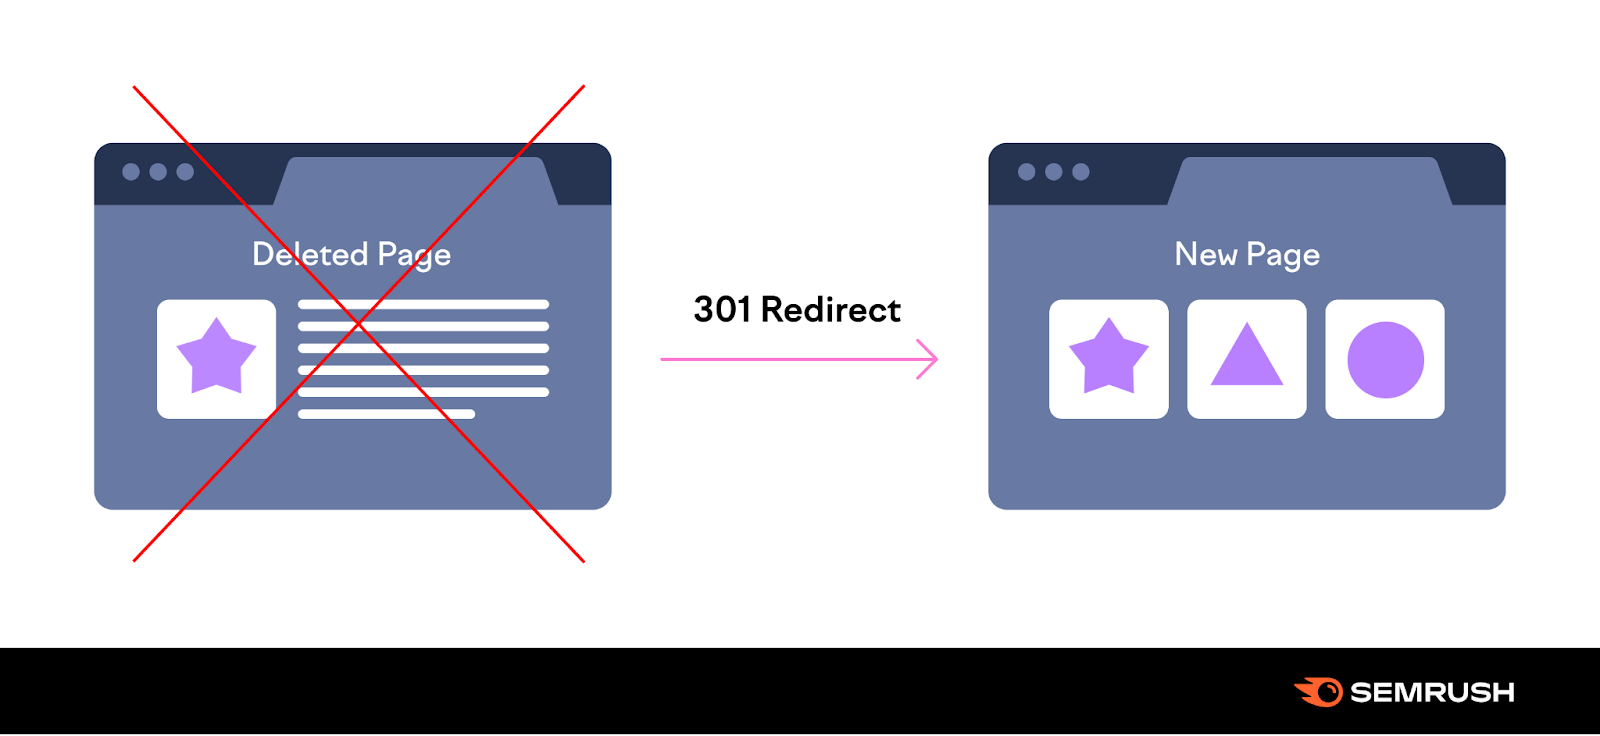 an image illustrating a deleted page with 301 redirect to a new page